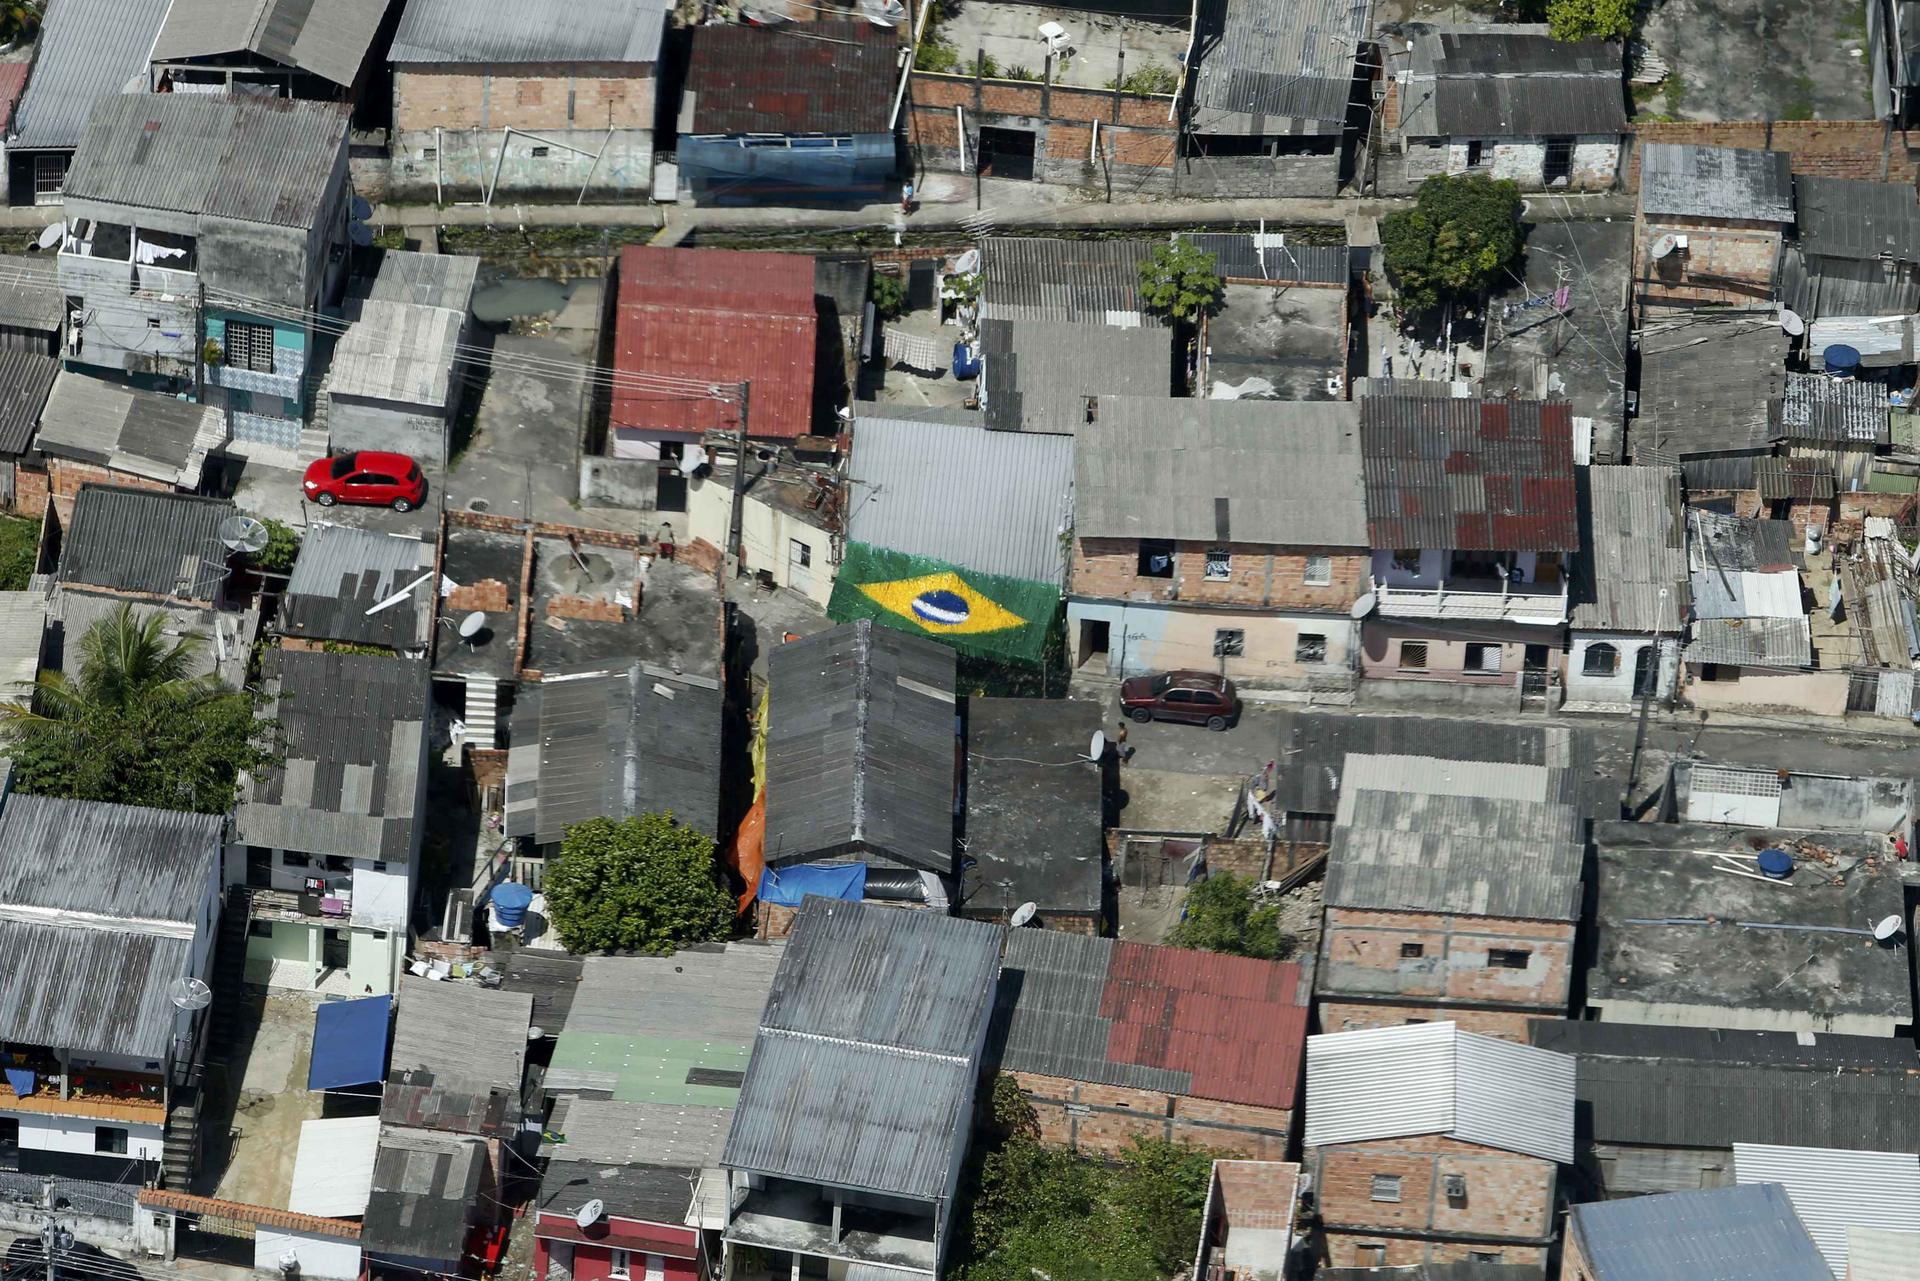 The city of Manaus doesn't have a soccer team with enough draw to make use of the stadium built there for the World Cup. But residents are guardedly optimistic it can continue to operate now that their city has had its moment in the global limelight. Photo: Reuters